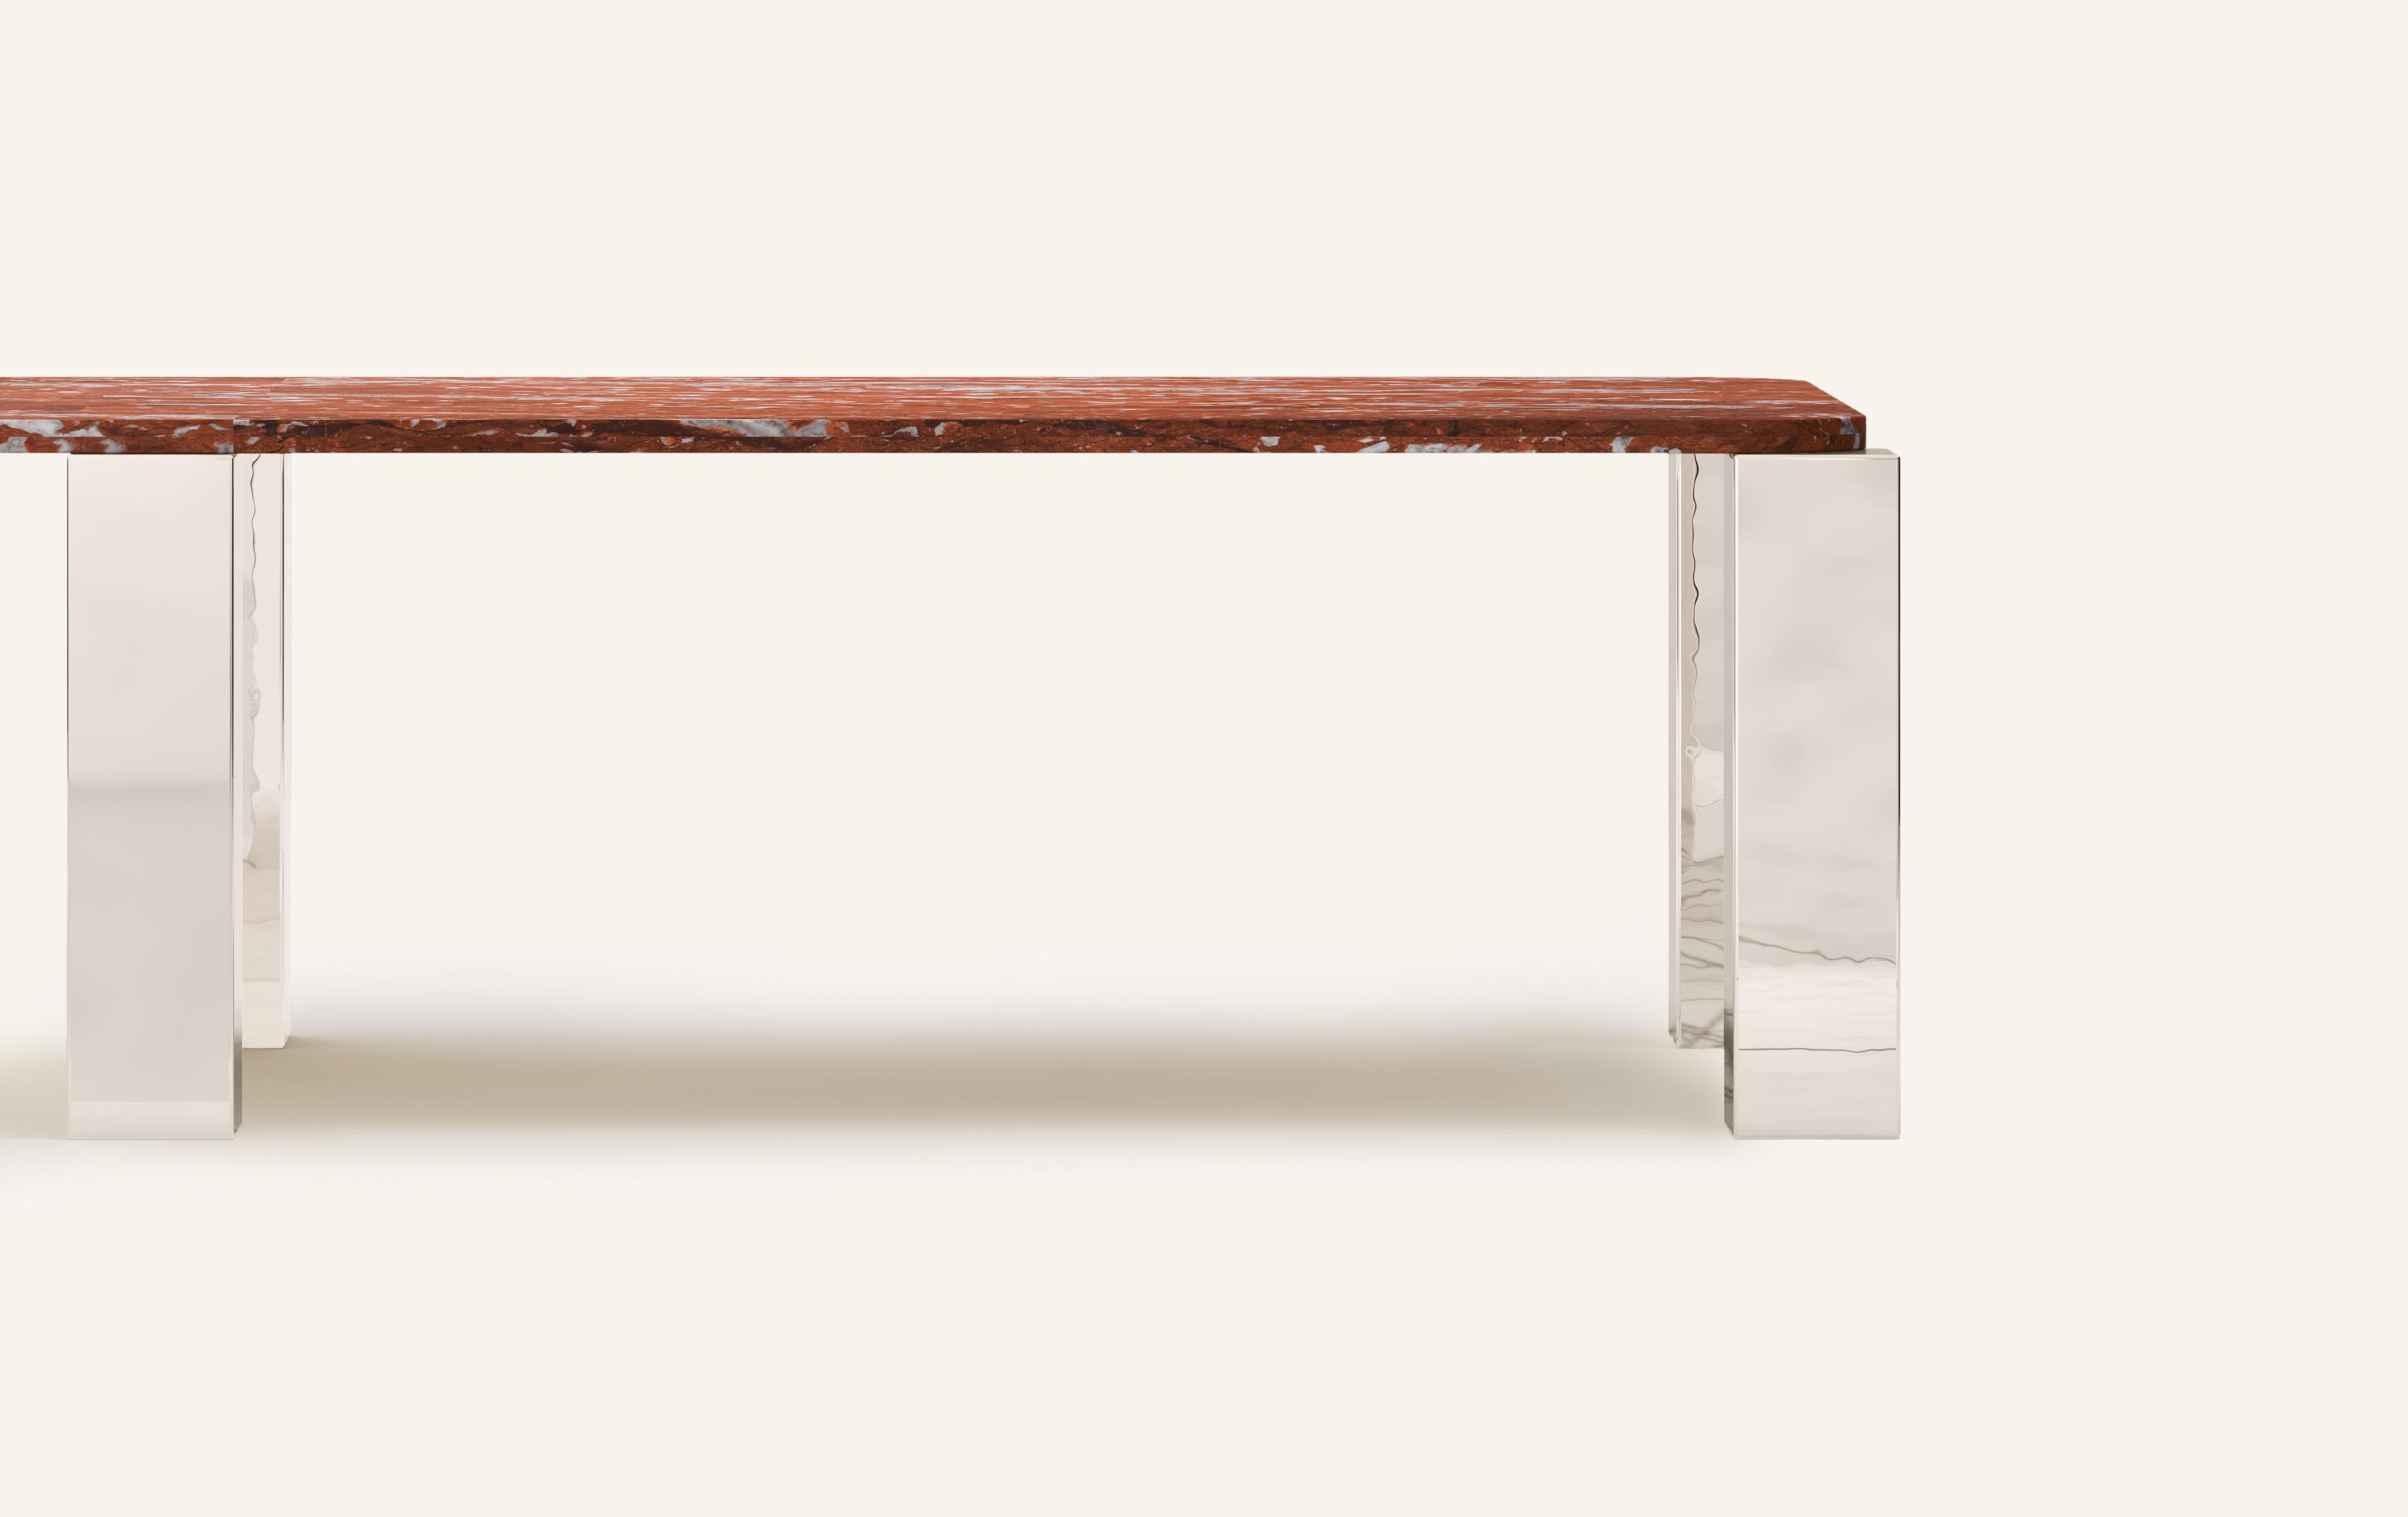 American FORM(LA) Cubo Rectangle Dining Table 146”L x 50”W x 30”H Francia Marble & Chrome For Sale